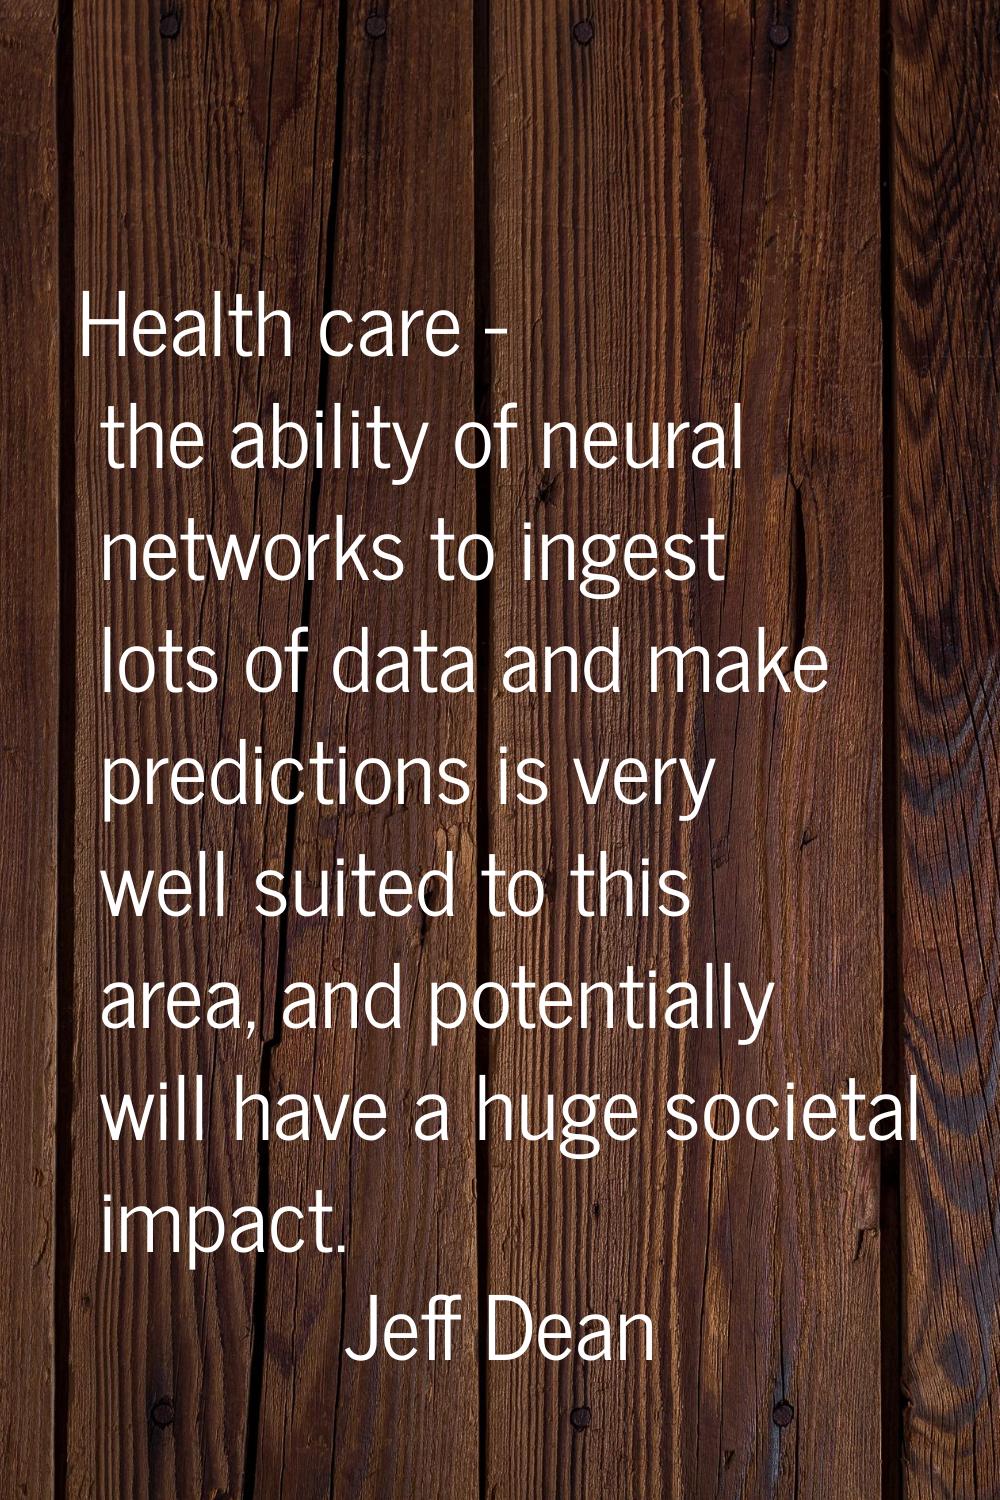 Health care - the ability of neural networks to ingest lots of data and make predictions is very we